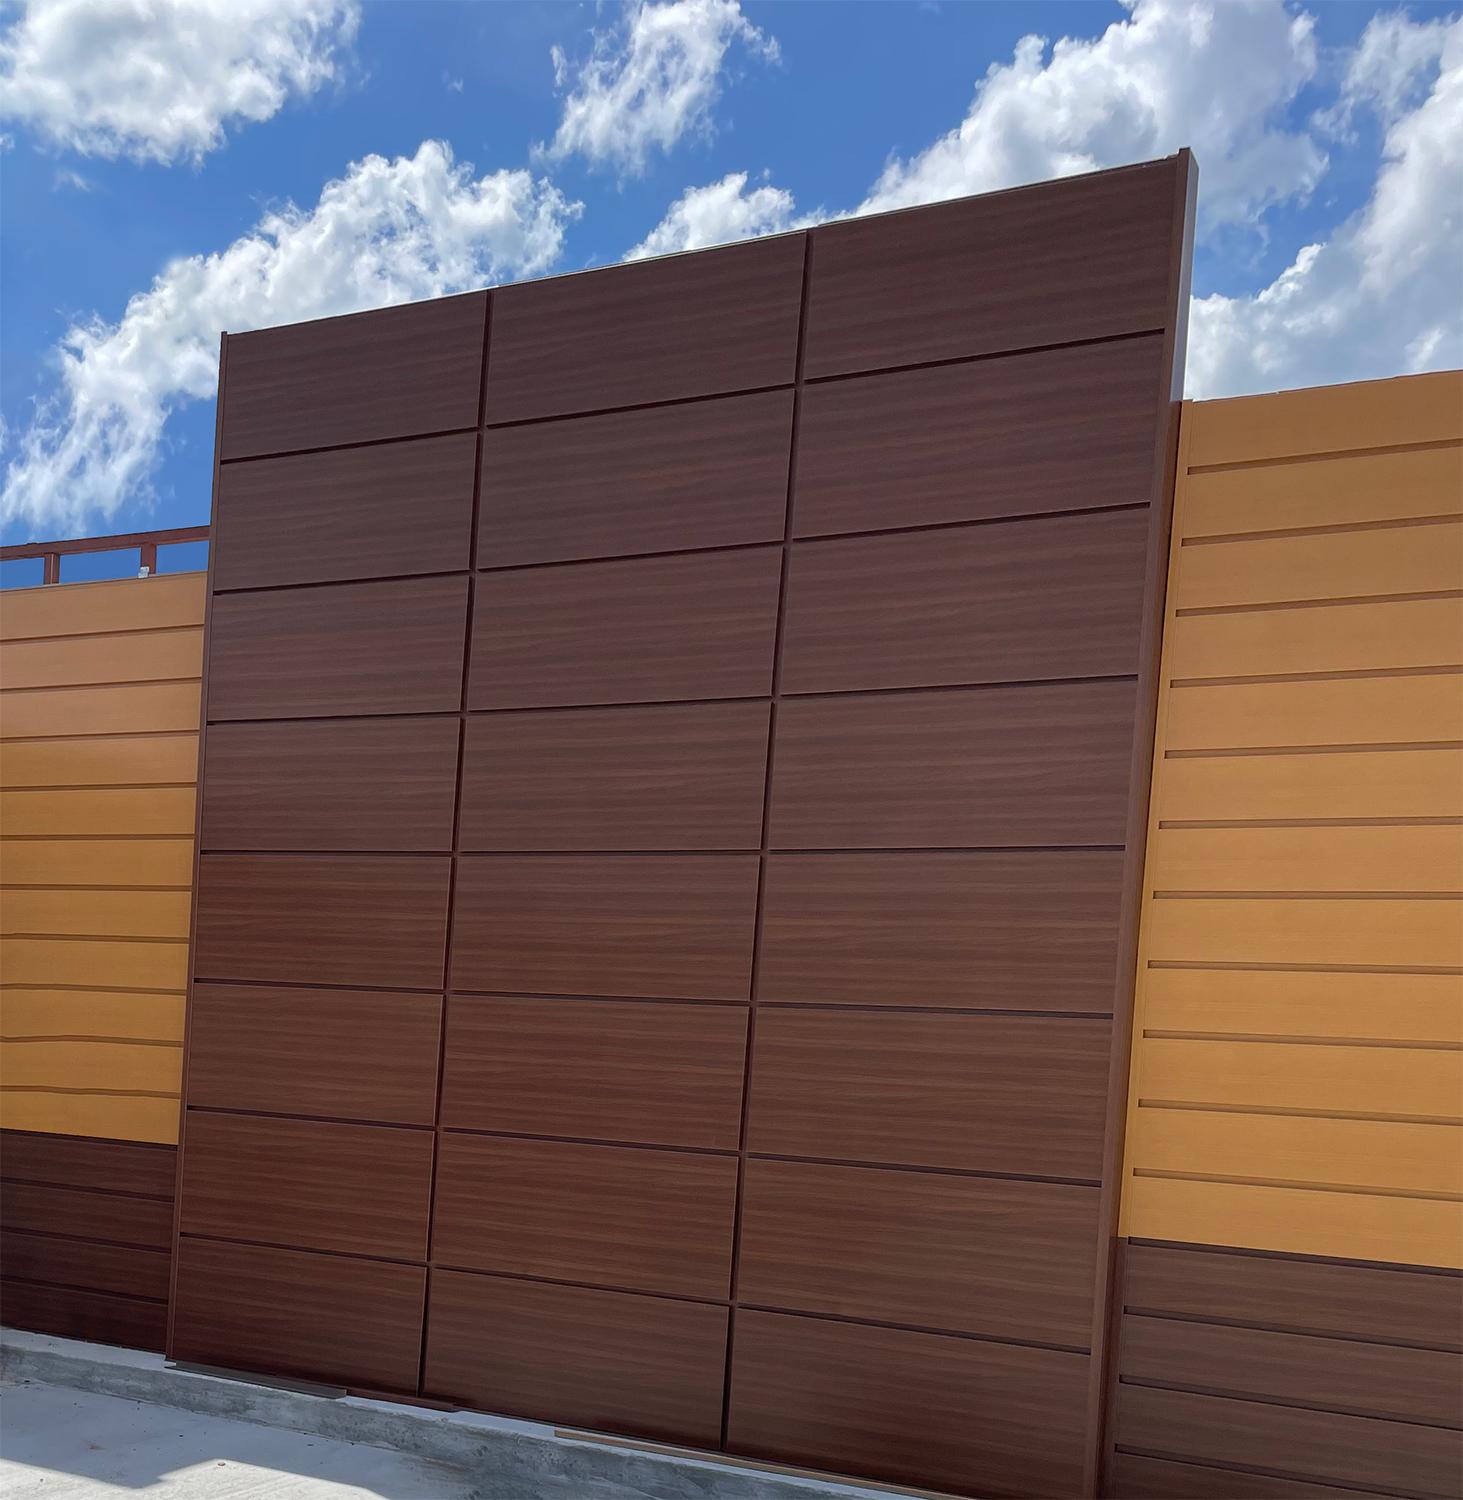 Commercial Building with Expand Panels in Espresso Woodgrain